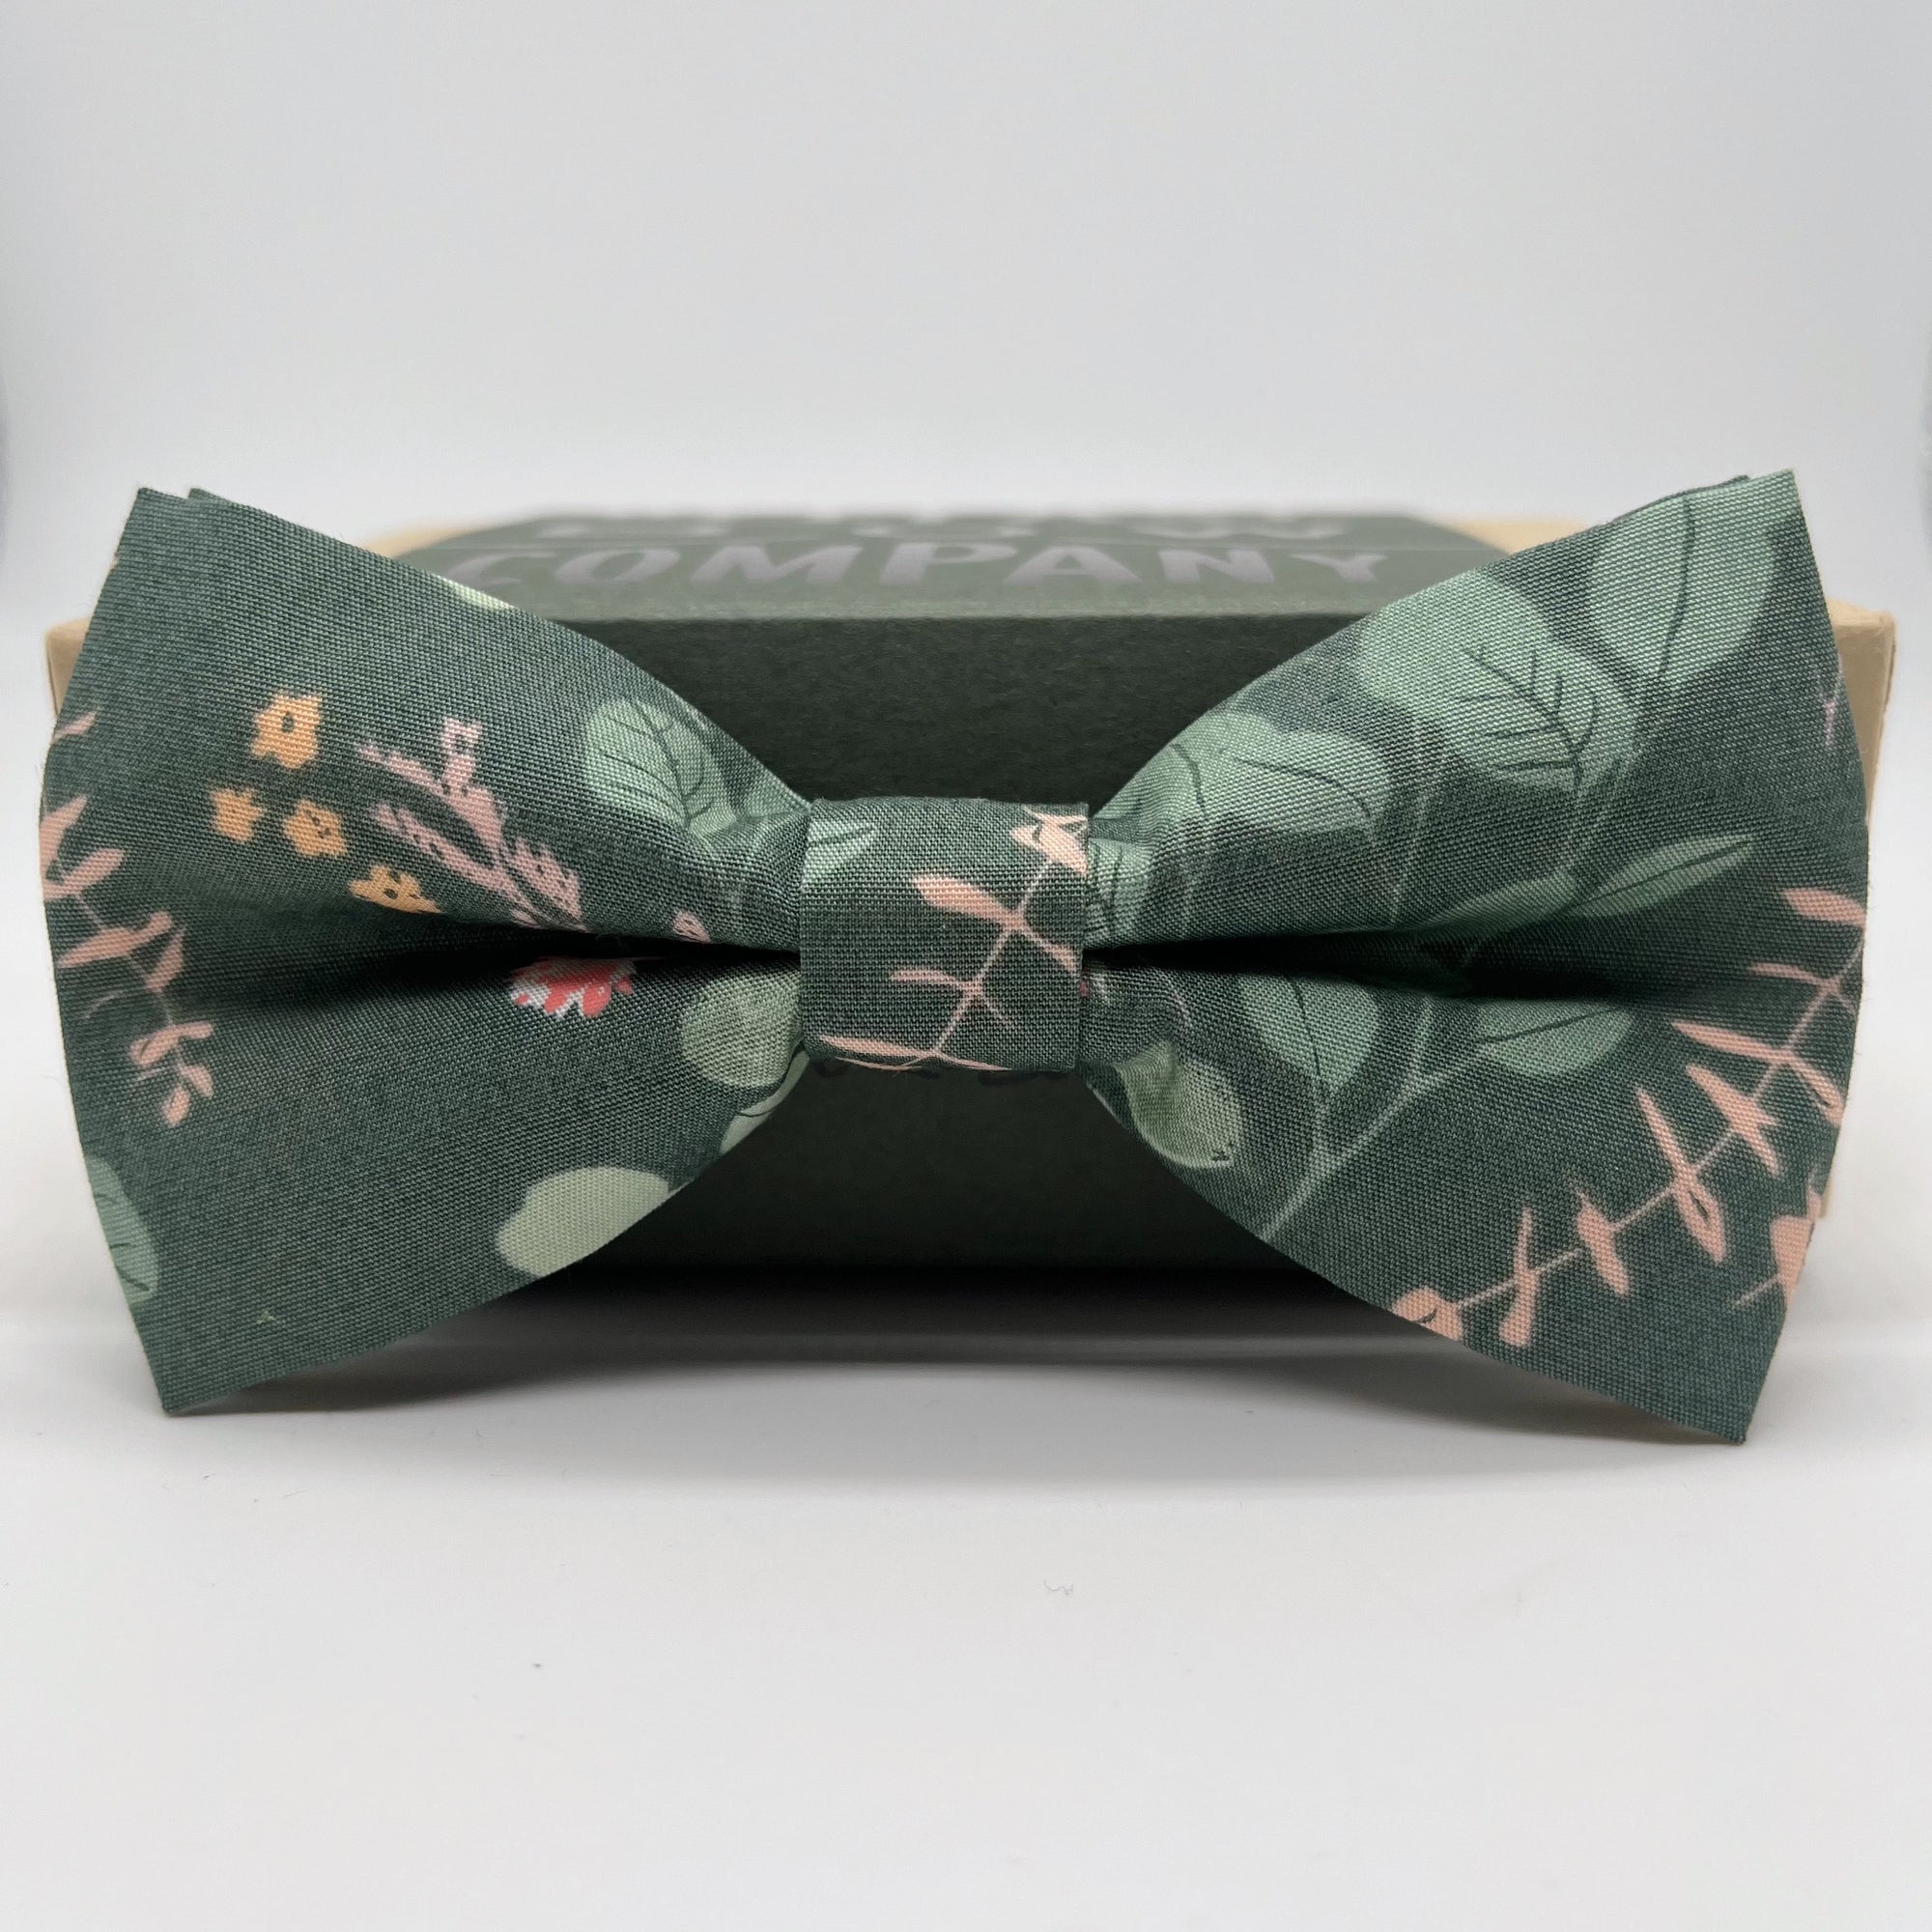 Dark Sage Green floral bow tie by the belfast bow company